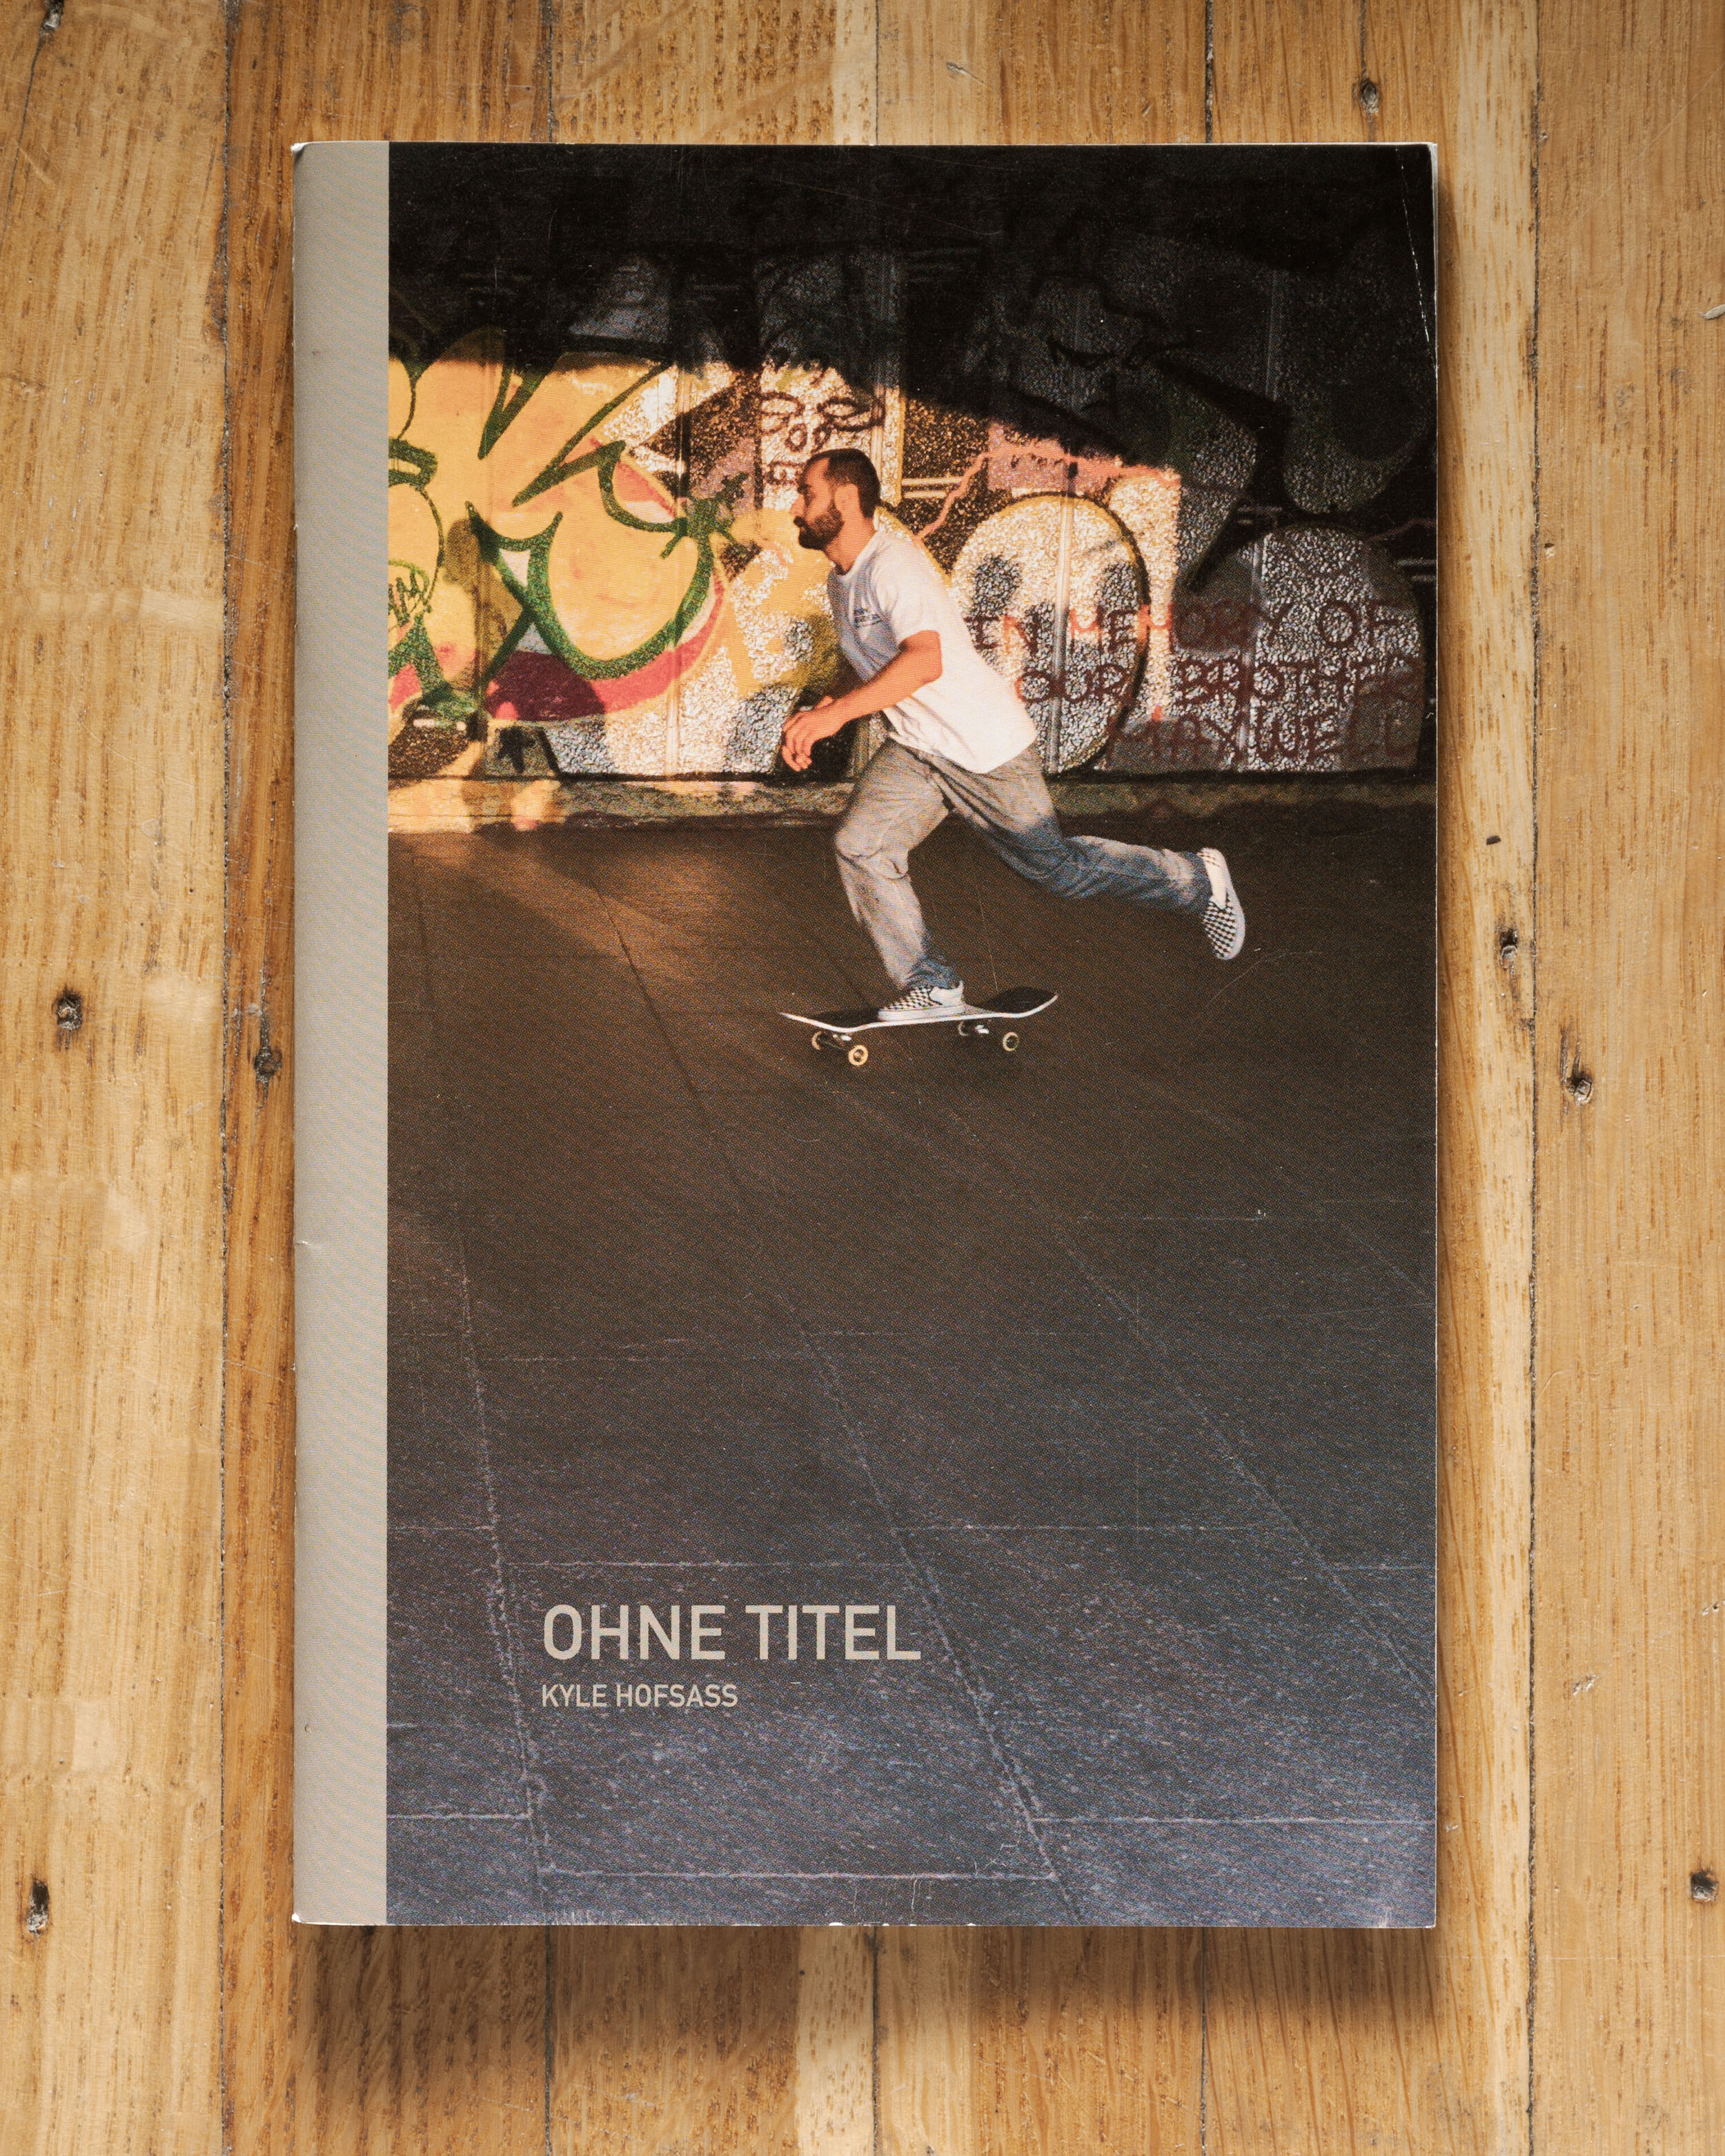  Ohne Titel - Self Published - 48 Pages, 5.25” x 8.25”, Saddle Stitch  Photographs from traveling and skateboarding in London, England and Berlin, Germany. 